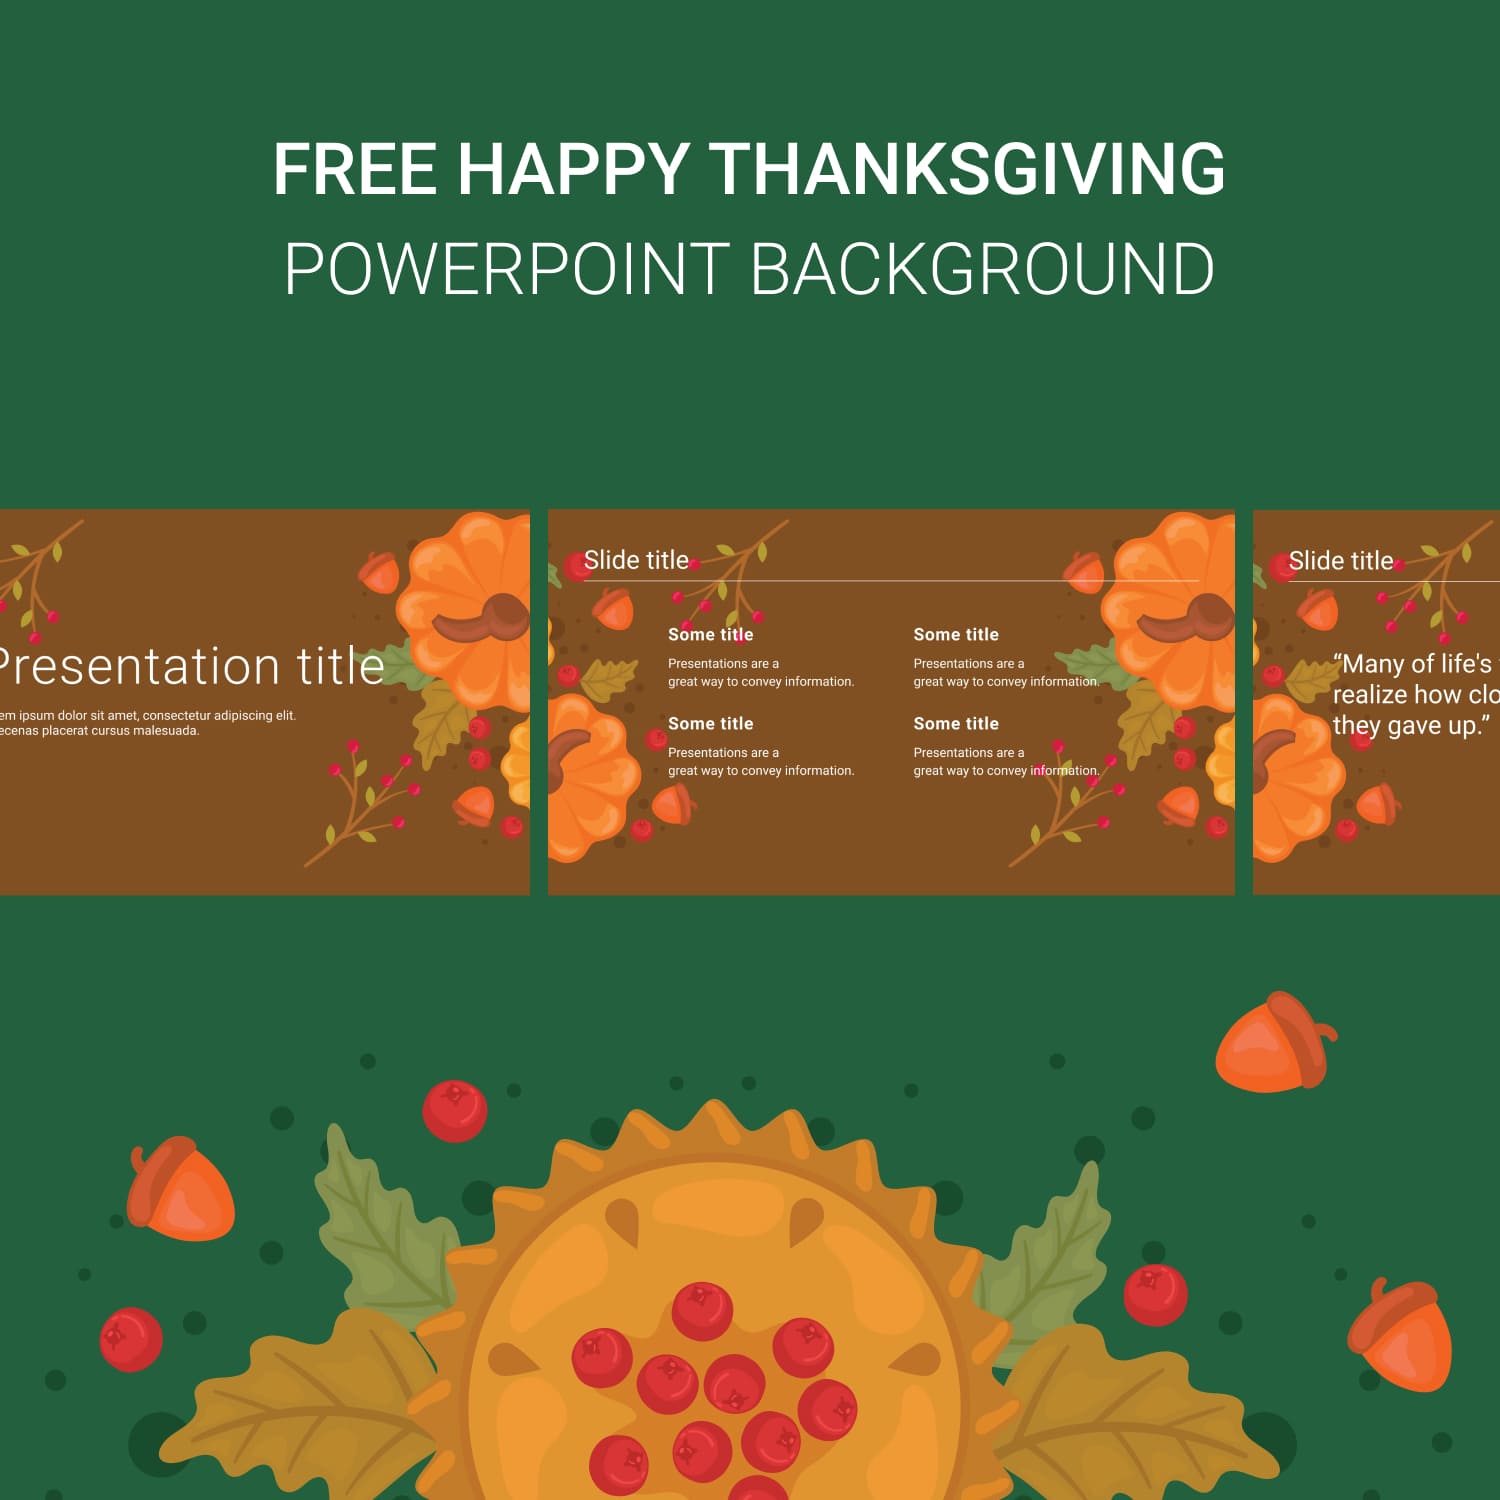 Preview Free Happy Thanksgiving Powerpoint Background 1500x1500 2.